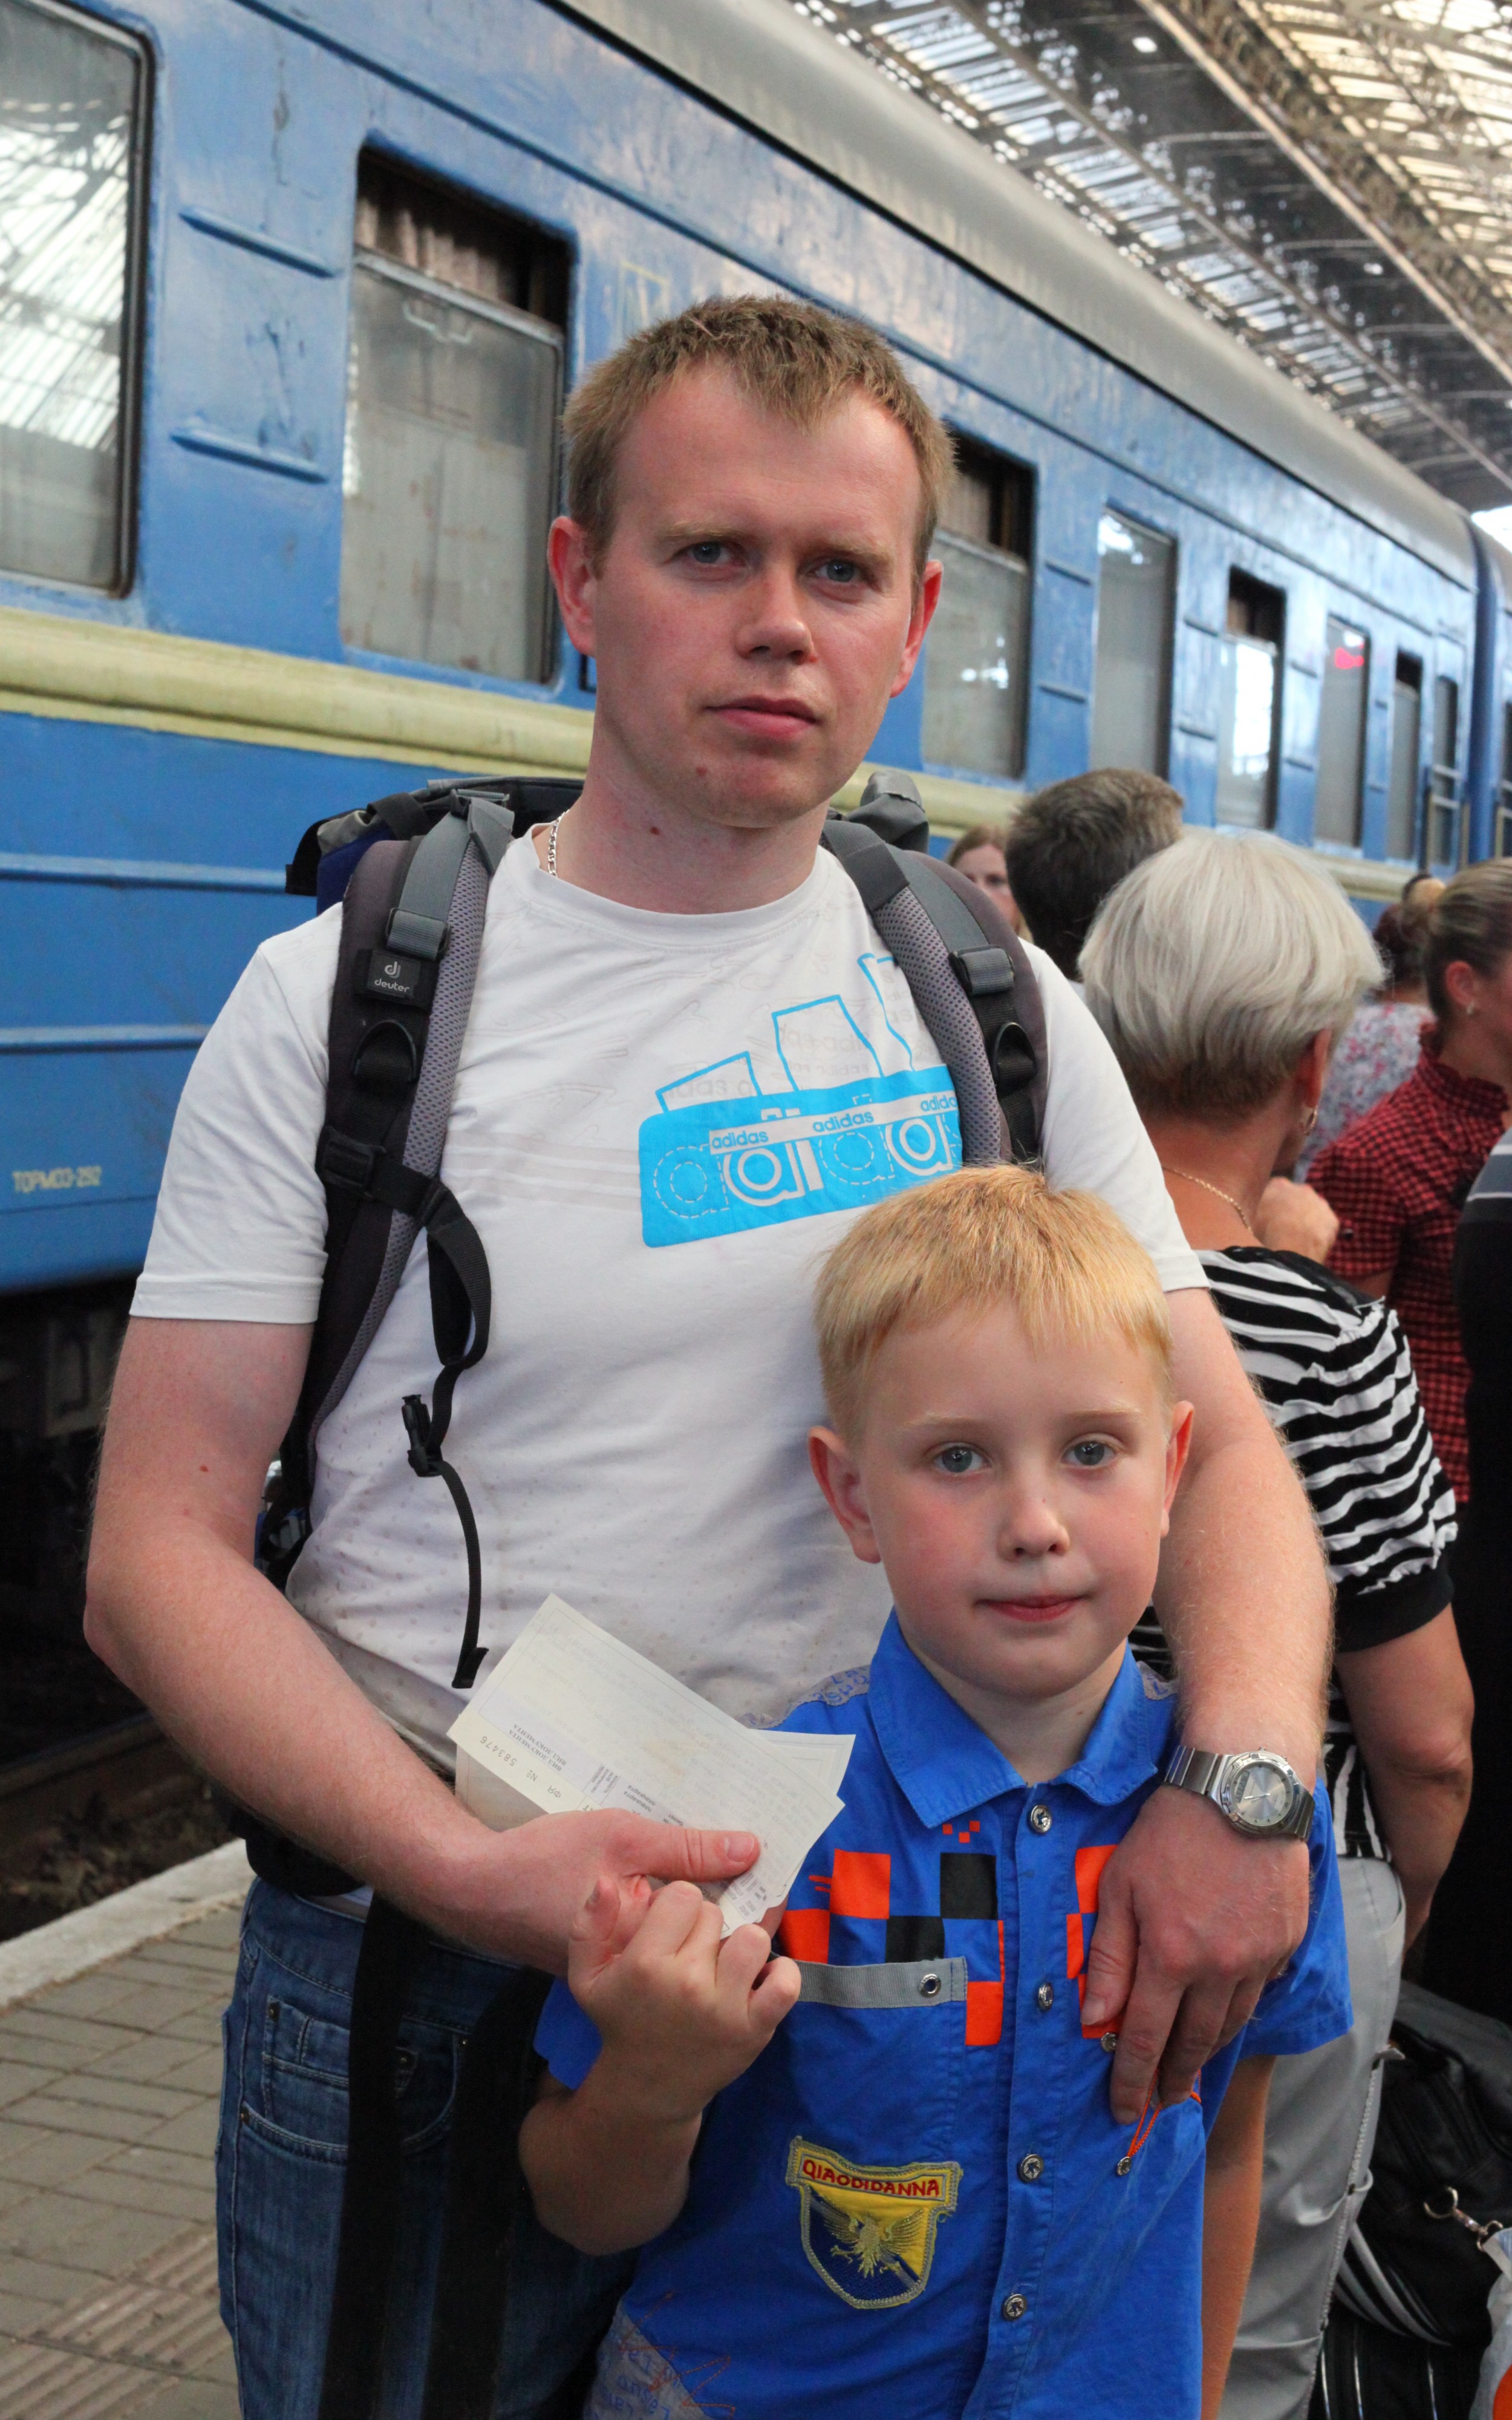 A father and son at a train station